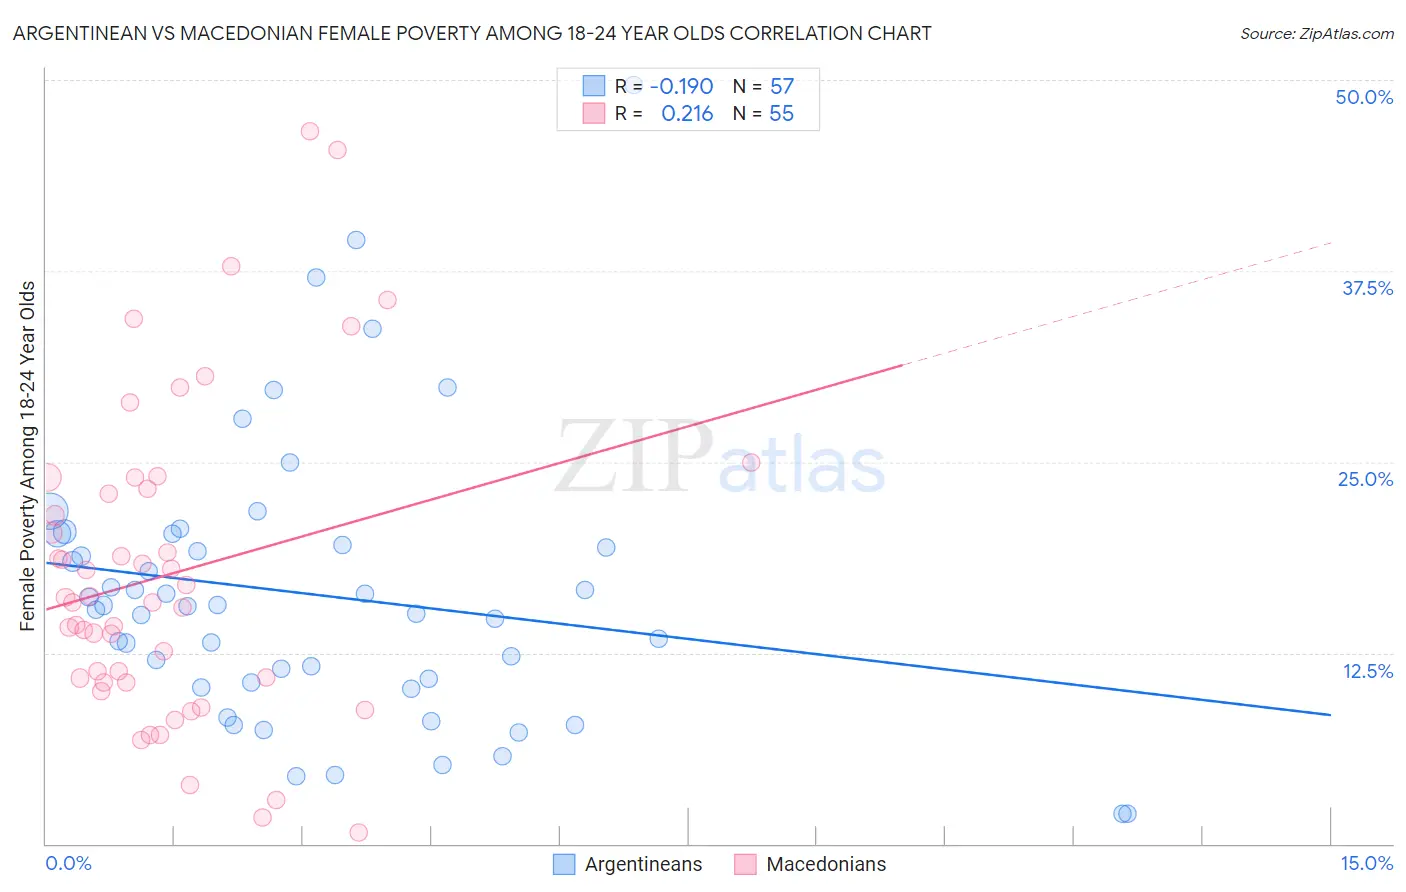 Argentinean vs Macedonian Female Poverty Among 18-24 Year Olds